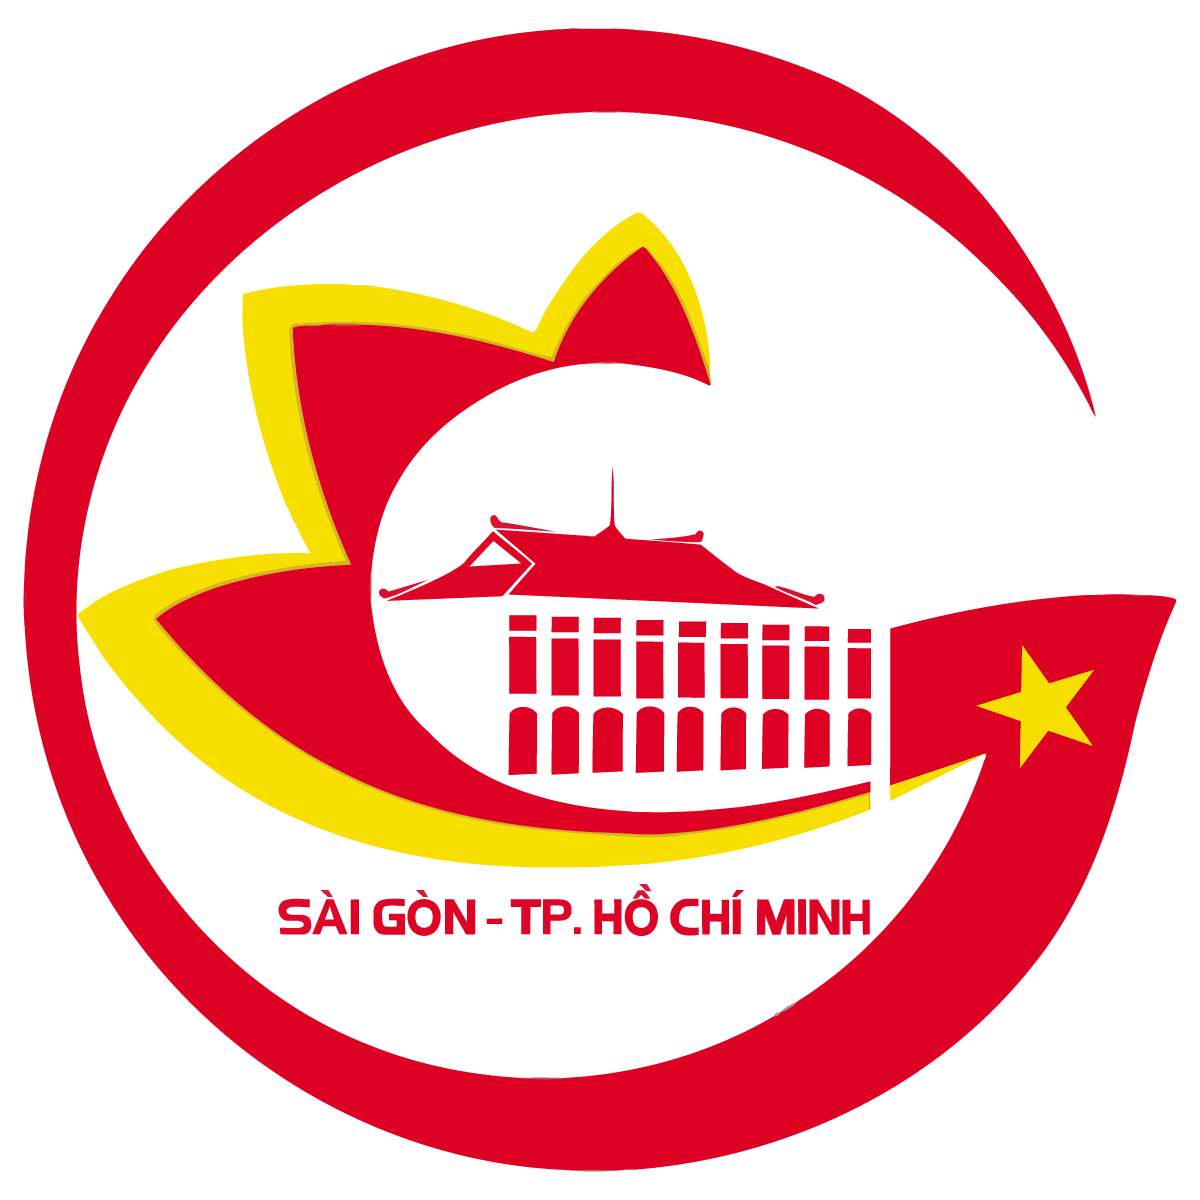 HO CHI MINH CITY PEOPLE'S COMMITTEE